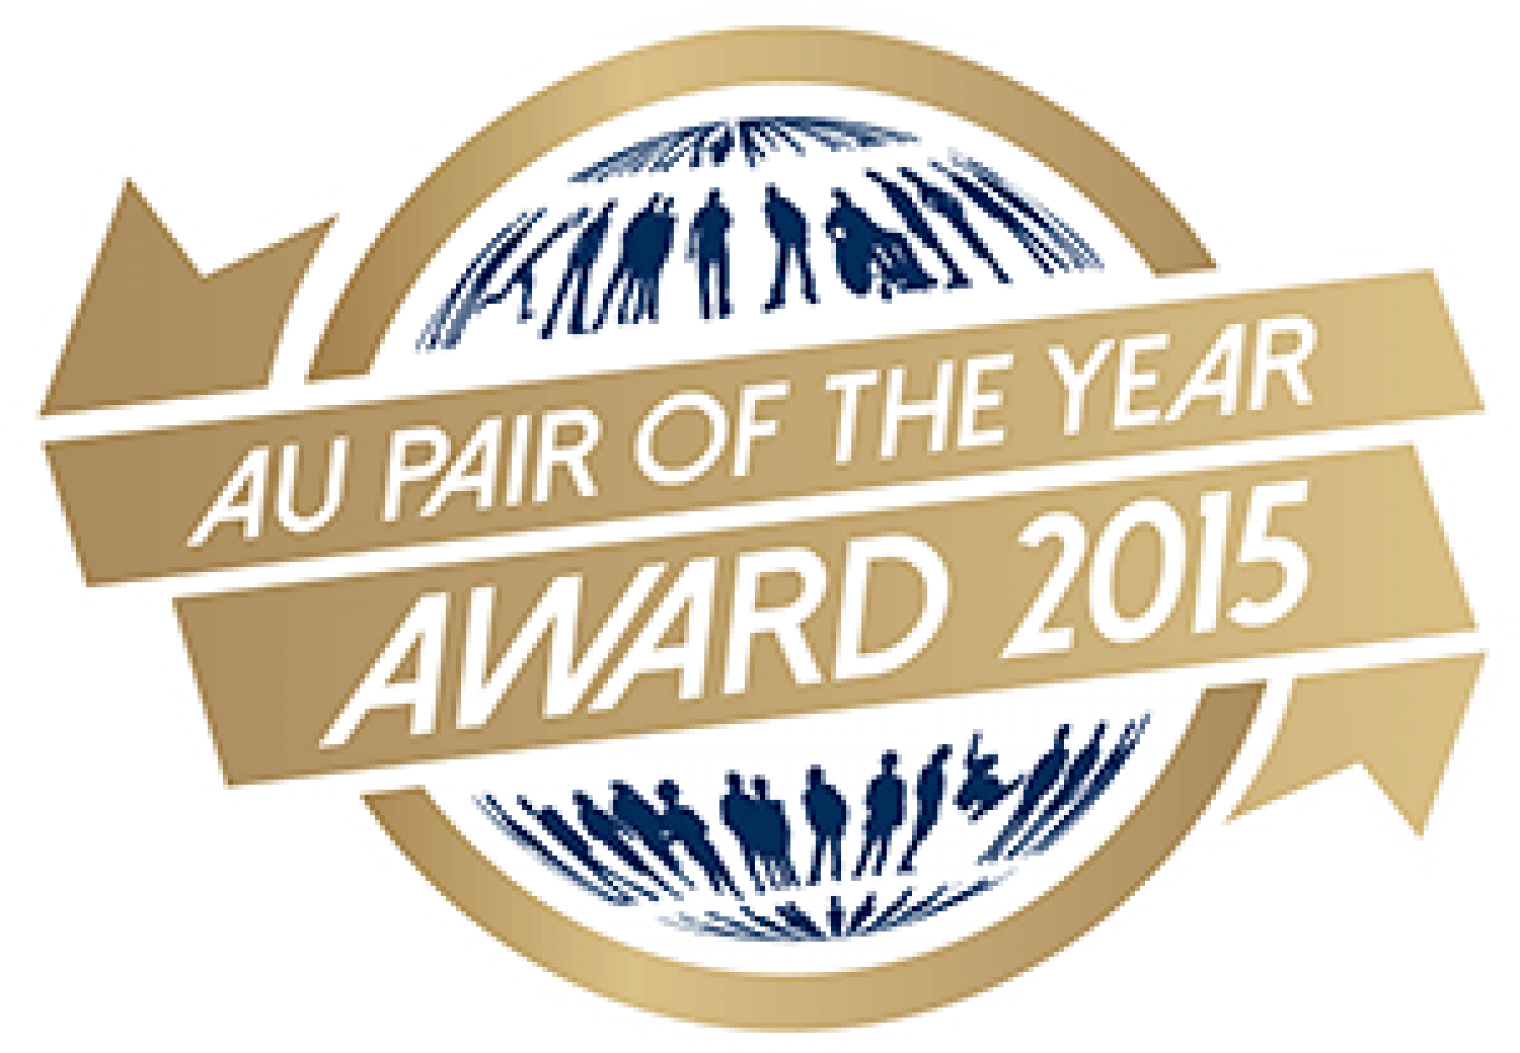 Au Pair of the Year 2015 – Meet our three finalists!